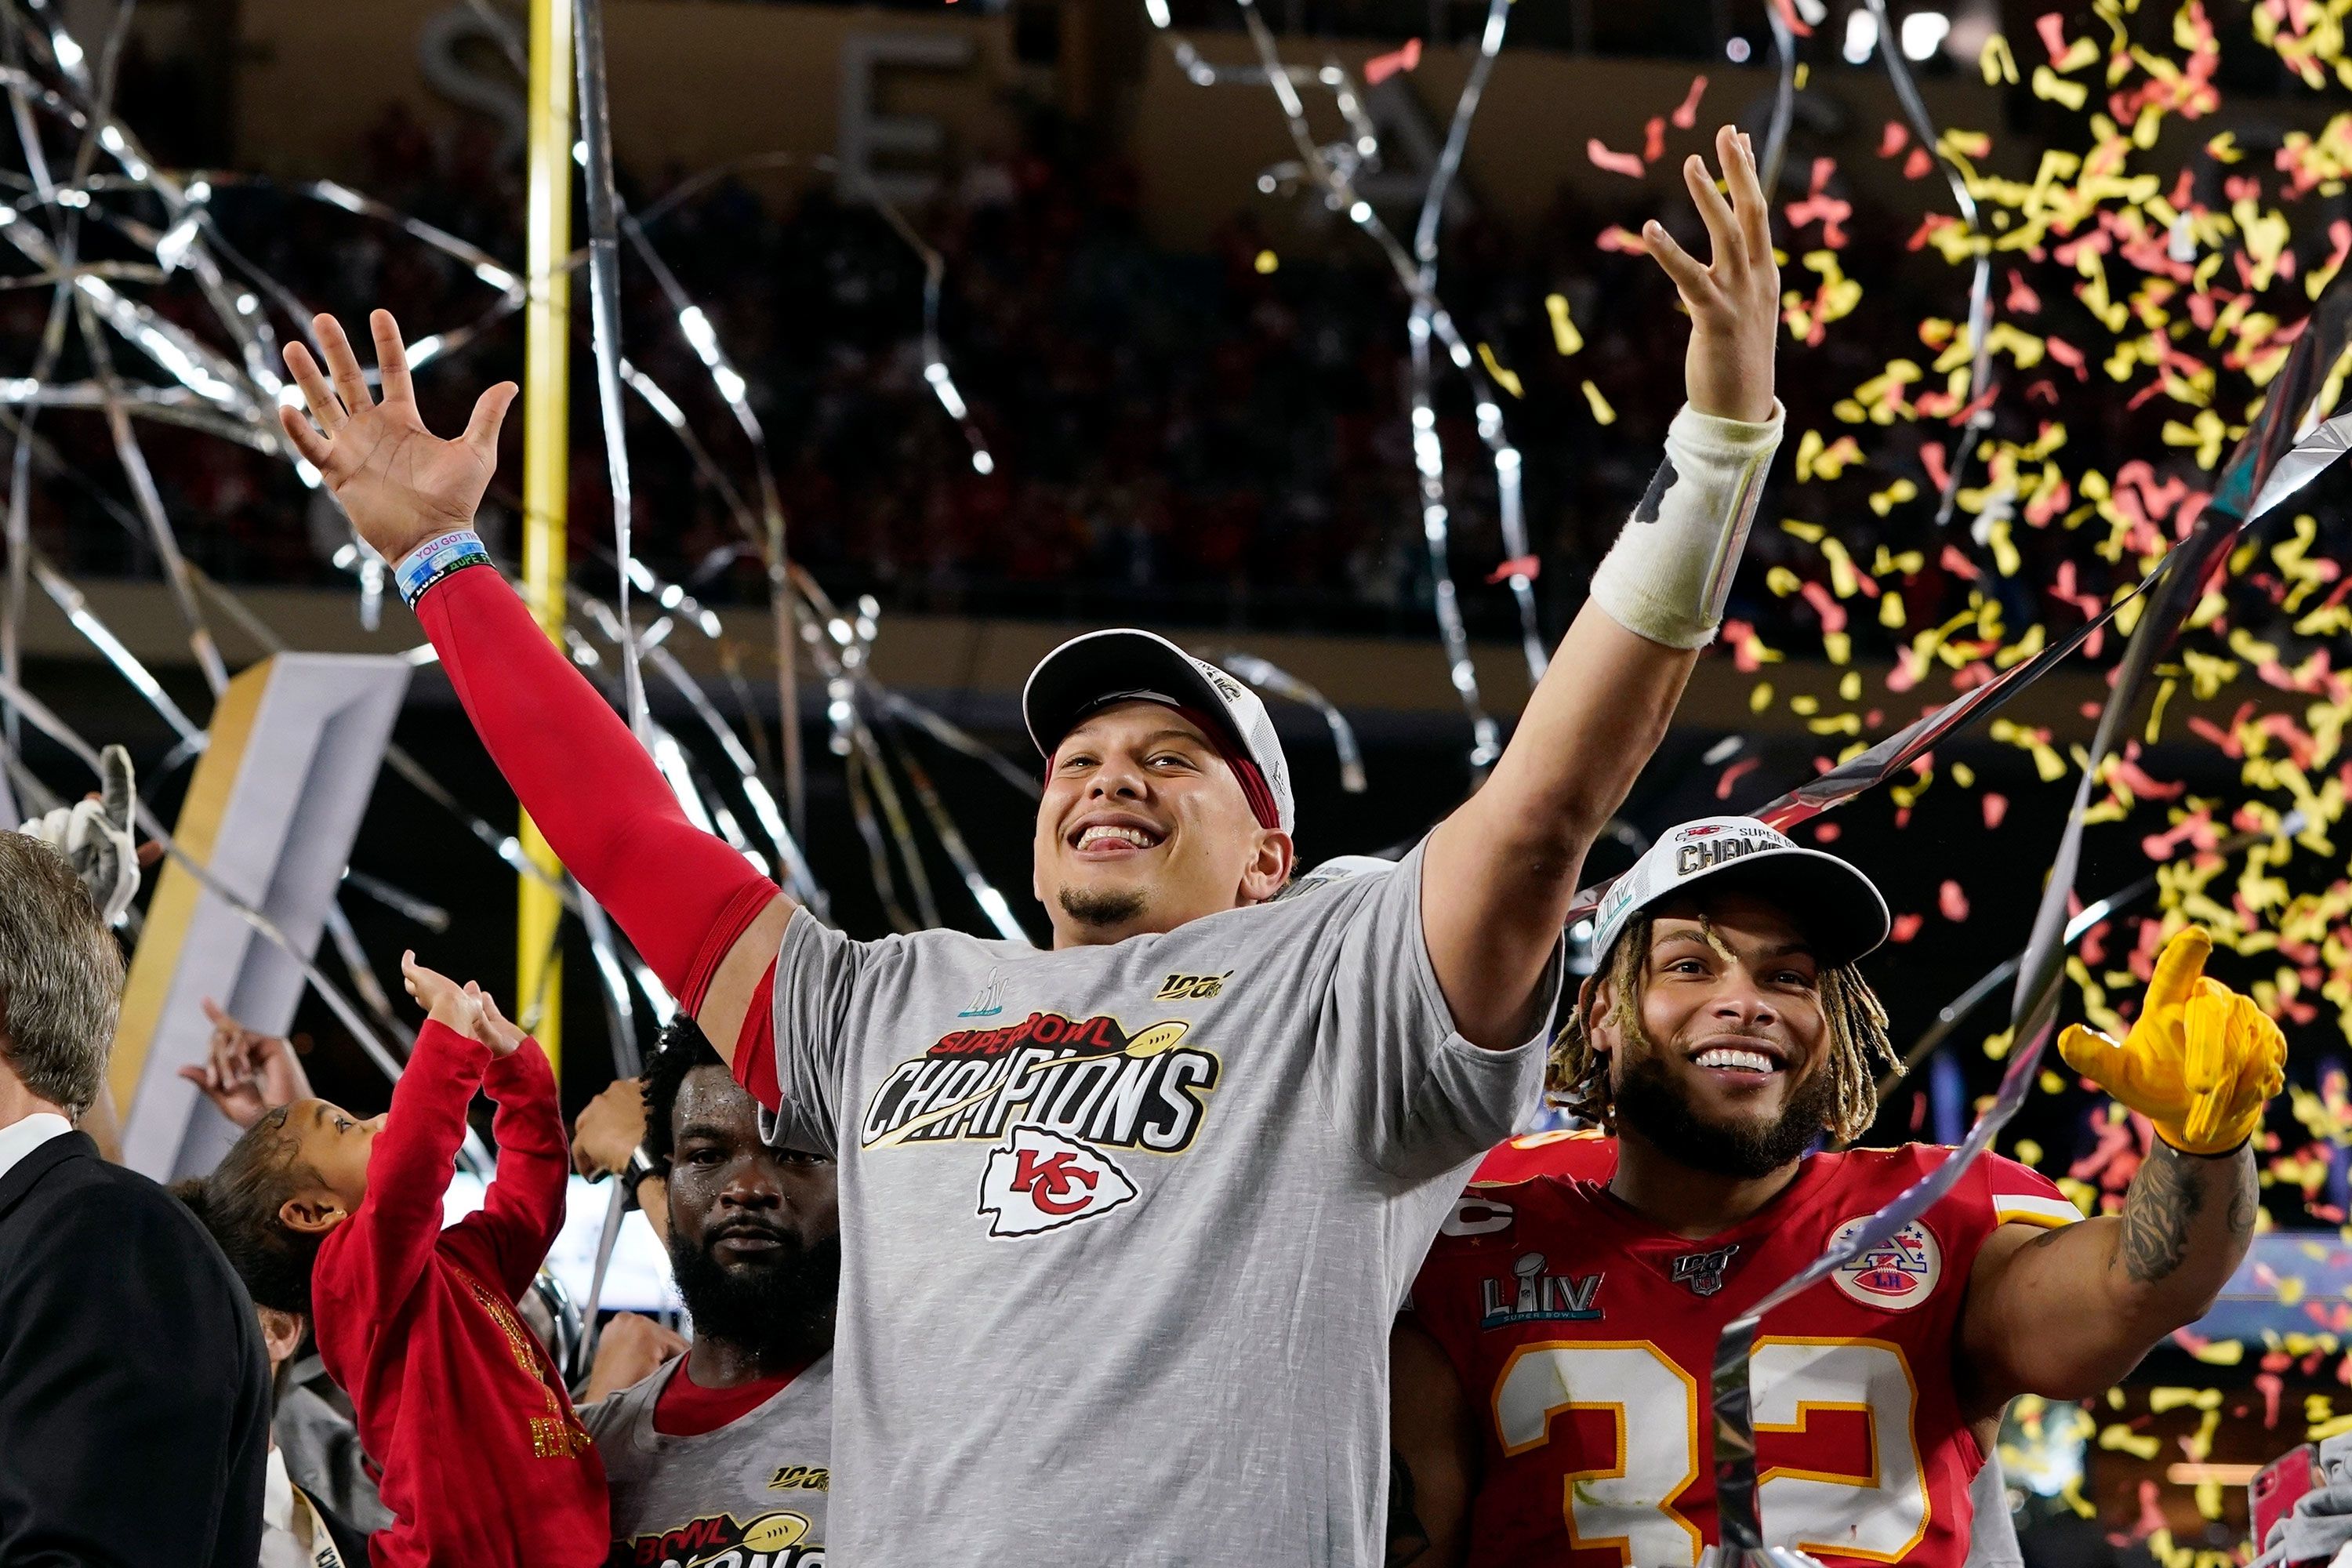 Kansas City Chiefs Super Bowl Wins History, Appearances, and More